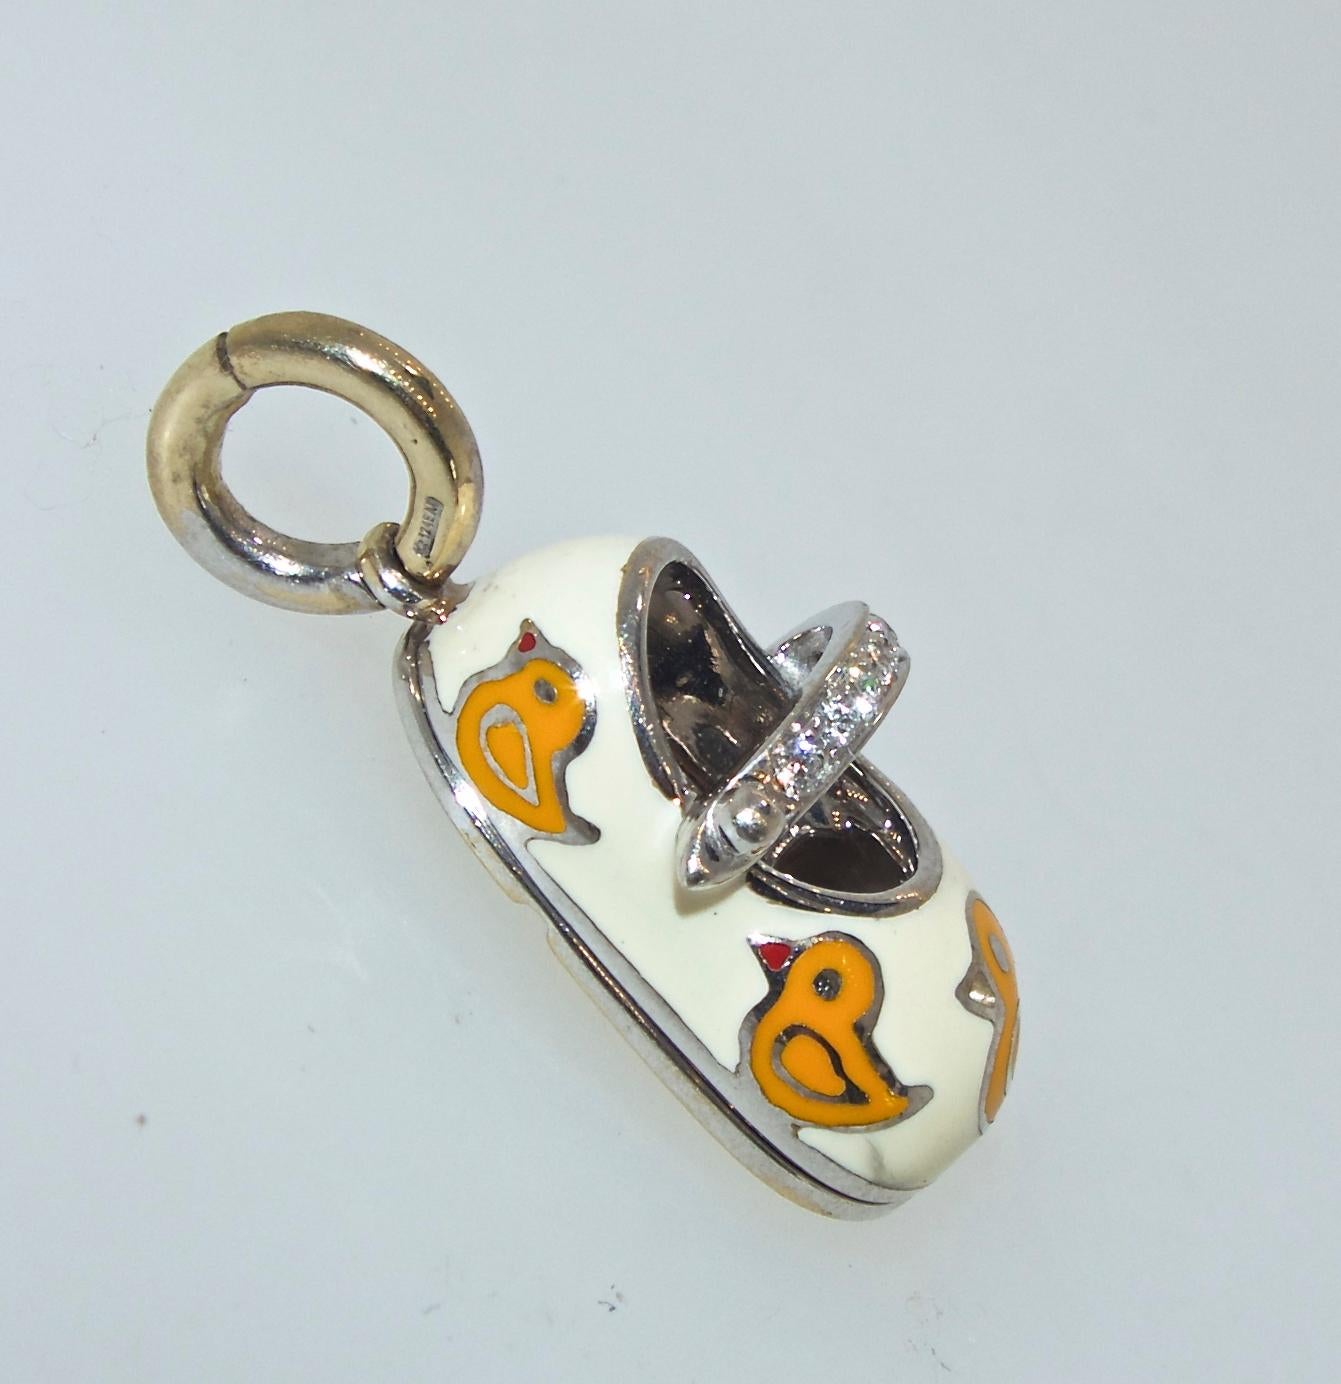 New condition, probably not worn, this pendant is yellow enamel of small ducks and decorated with white (H,VS1) diamonds, the baby shoe is one inch by .5 inches.  We will provide either an yellow or white gold 14K 16 inch. chain